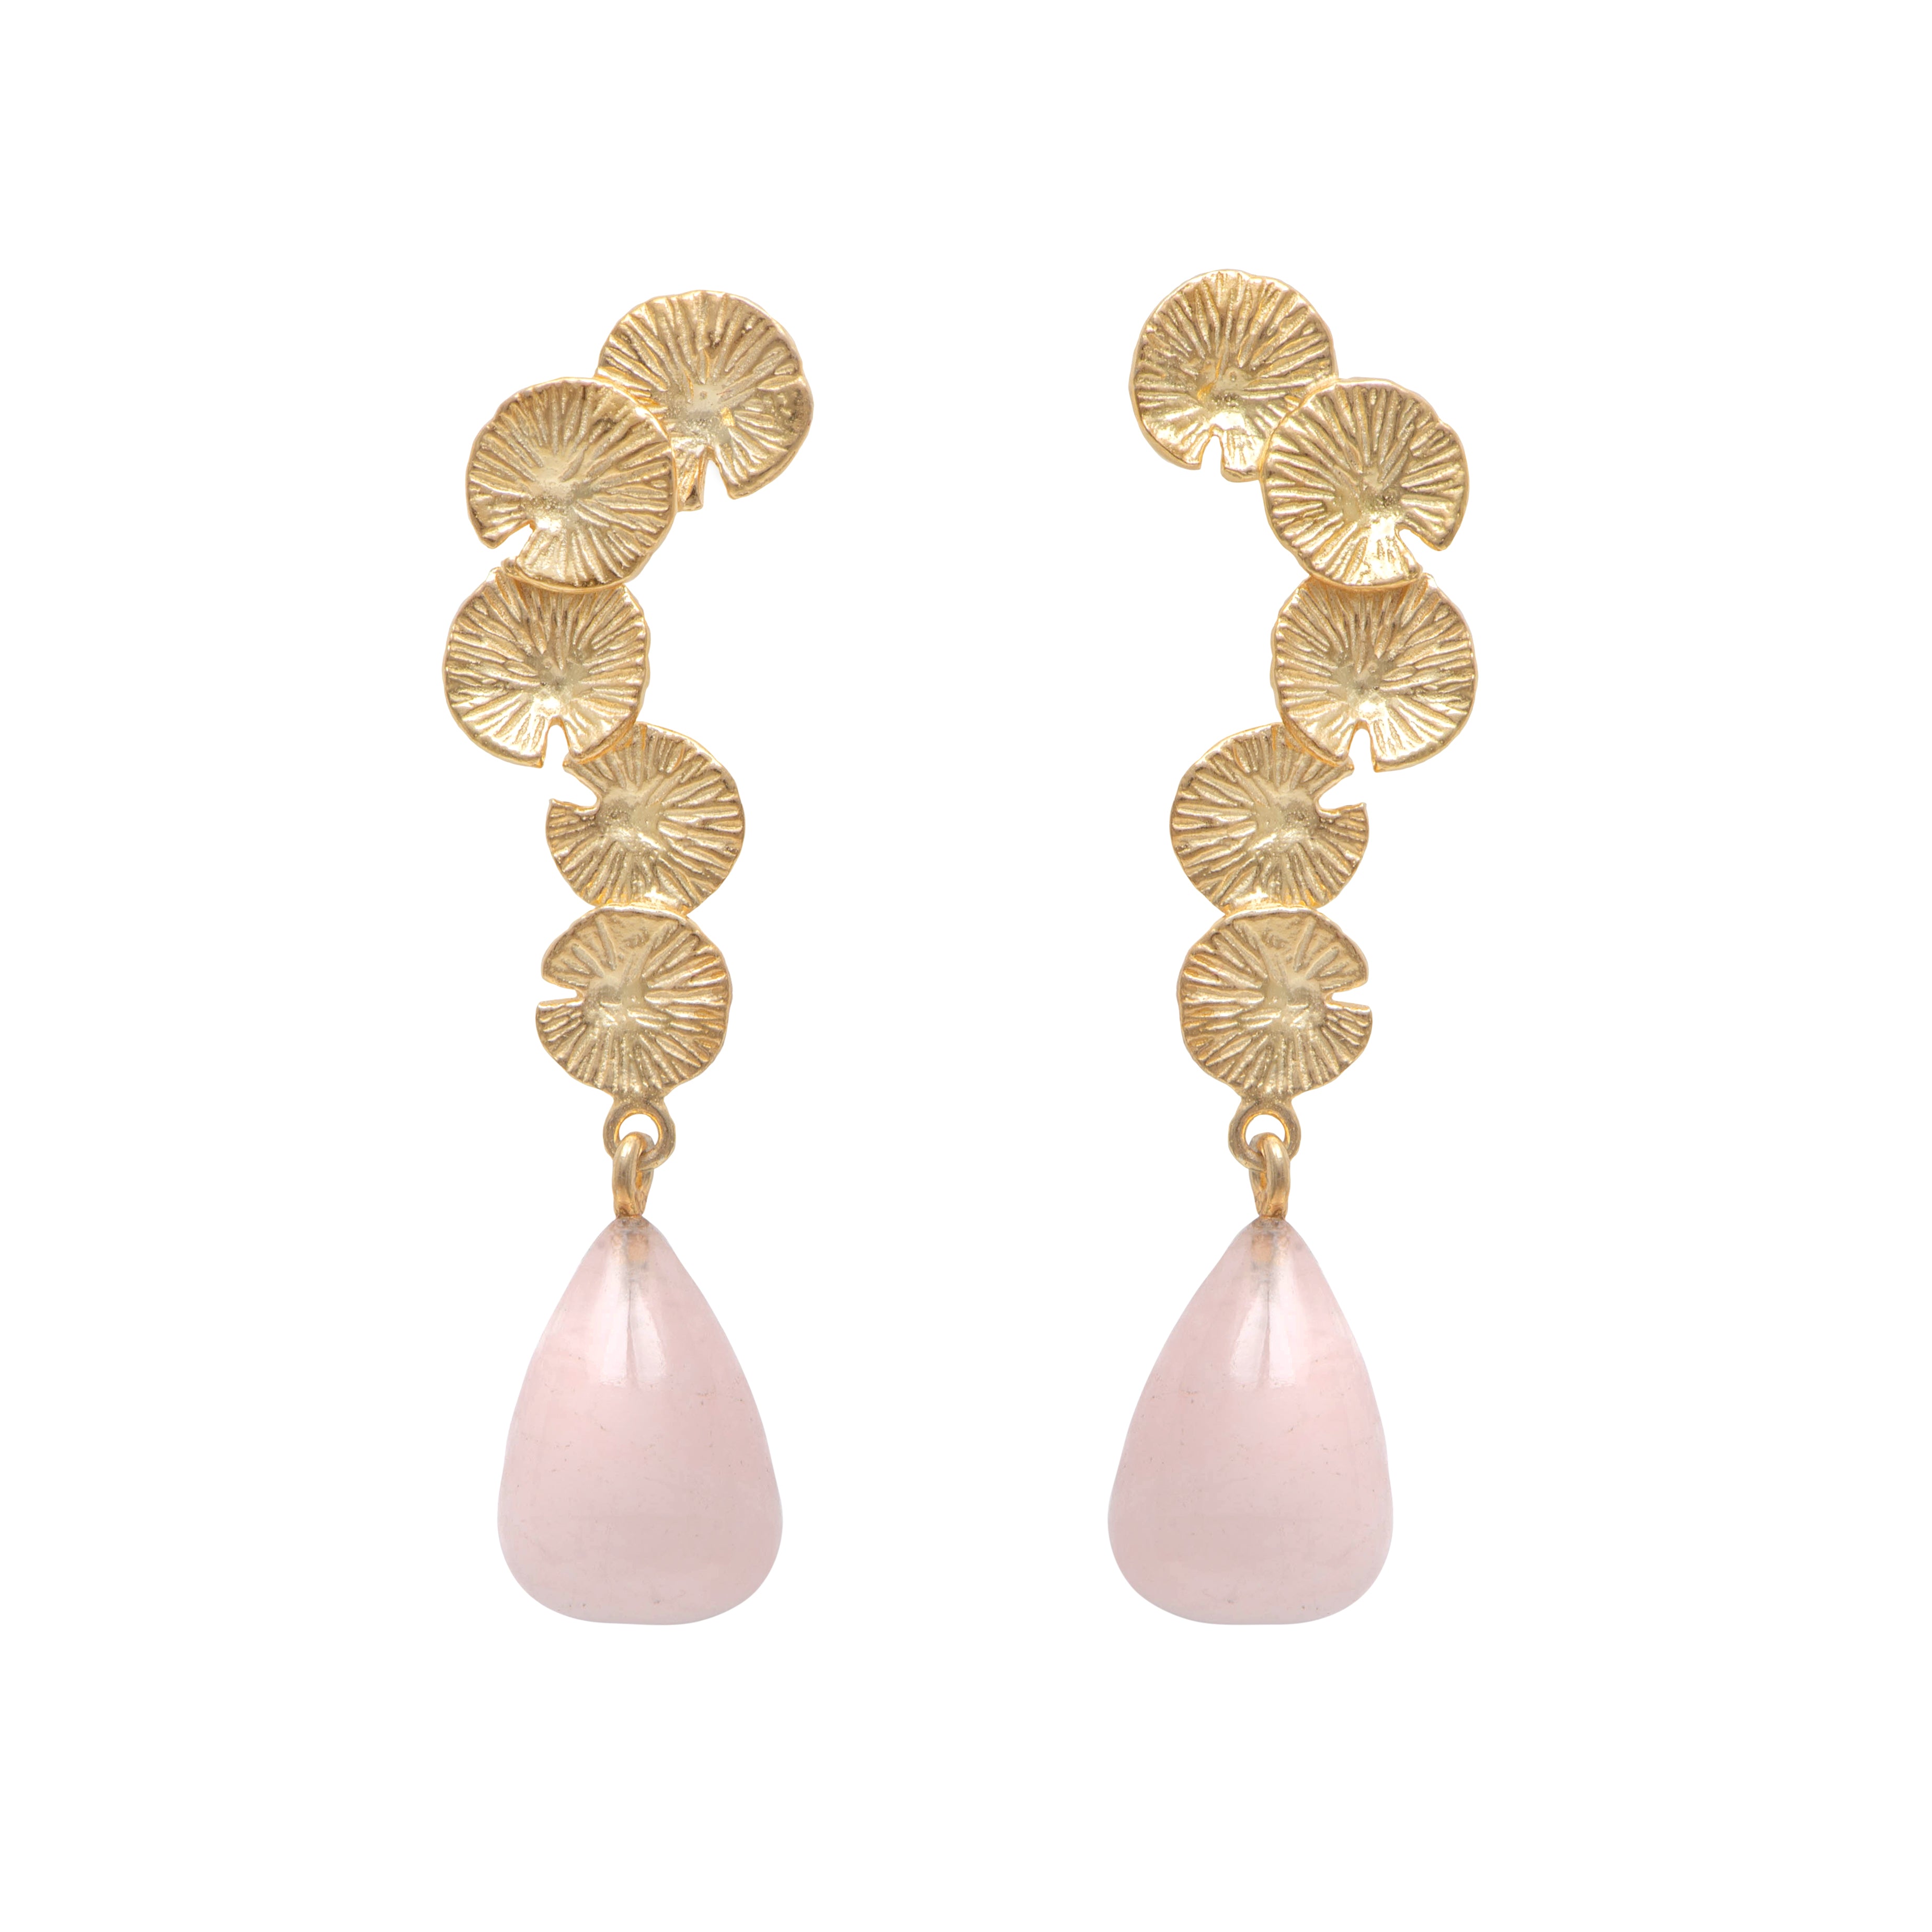 Lily Pad Earrings in Gold Plated Sterling Silver with a Rose Quartz Stone Drop